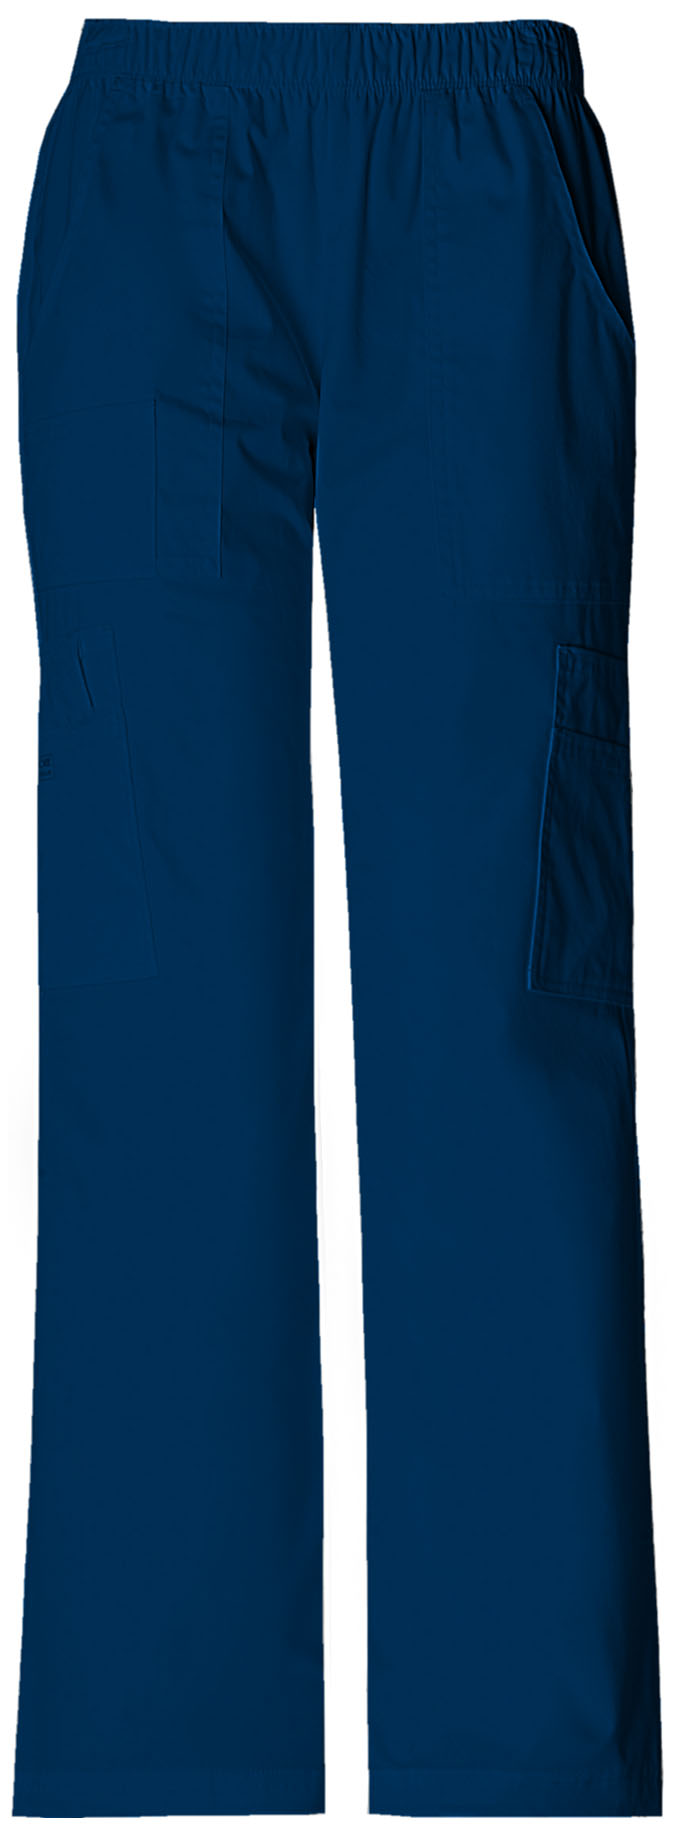 Cherokee Ladies Tall Mid-Rise Pull-On Pant Cargo Pant 4005T